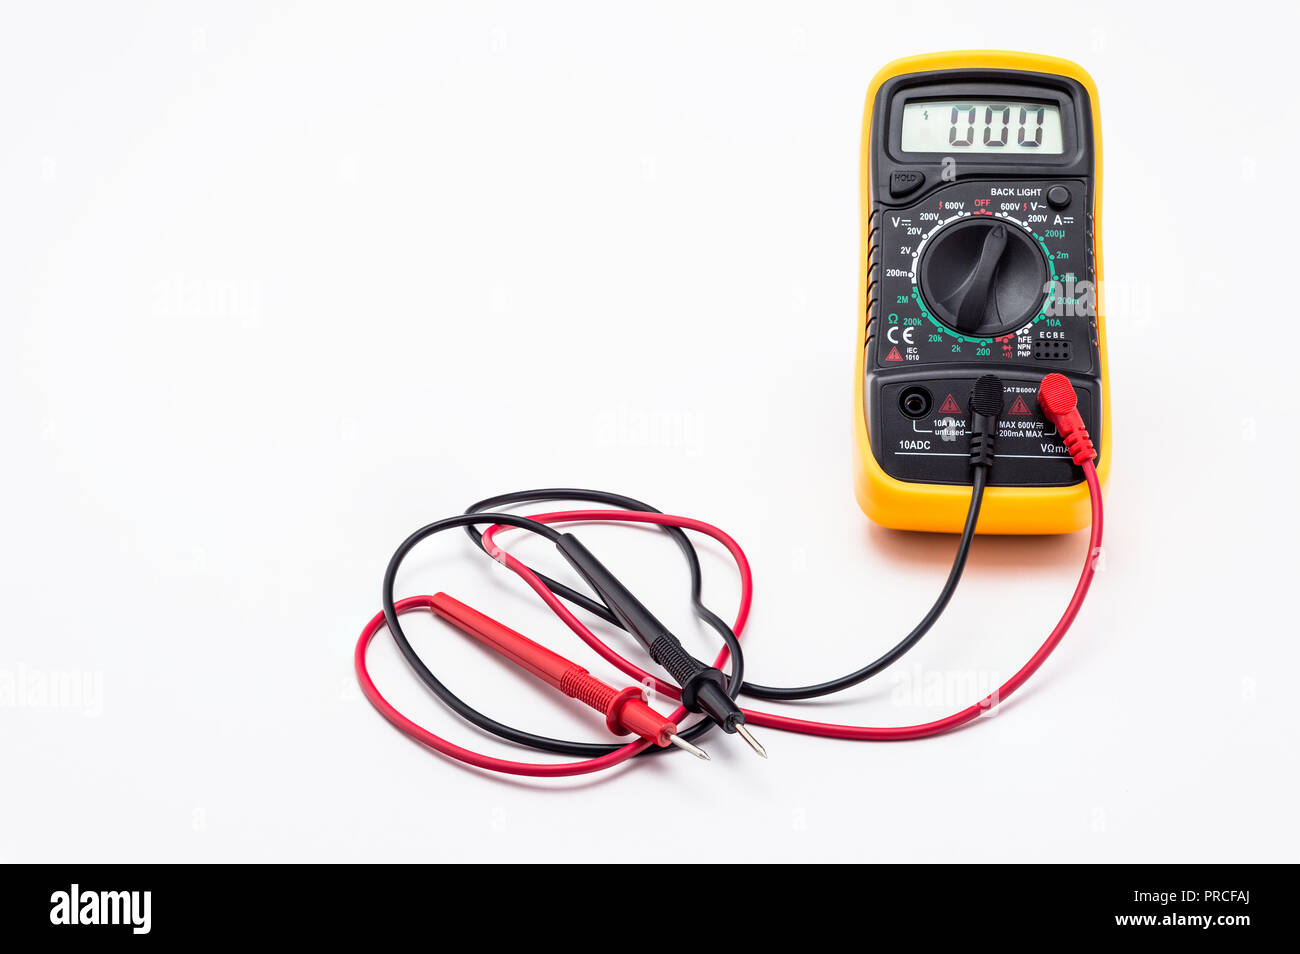 Electric multimeter with red and black probe, display indicating